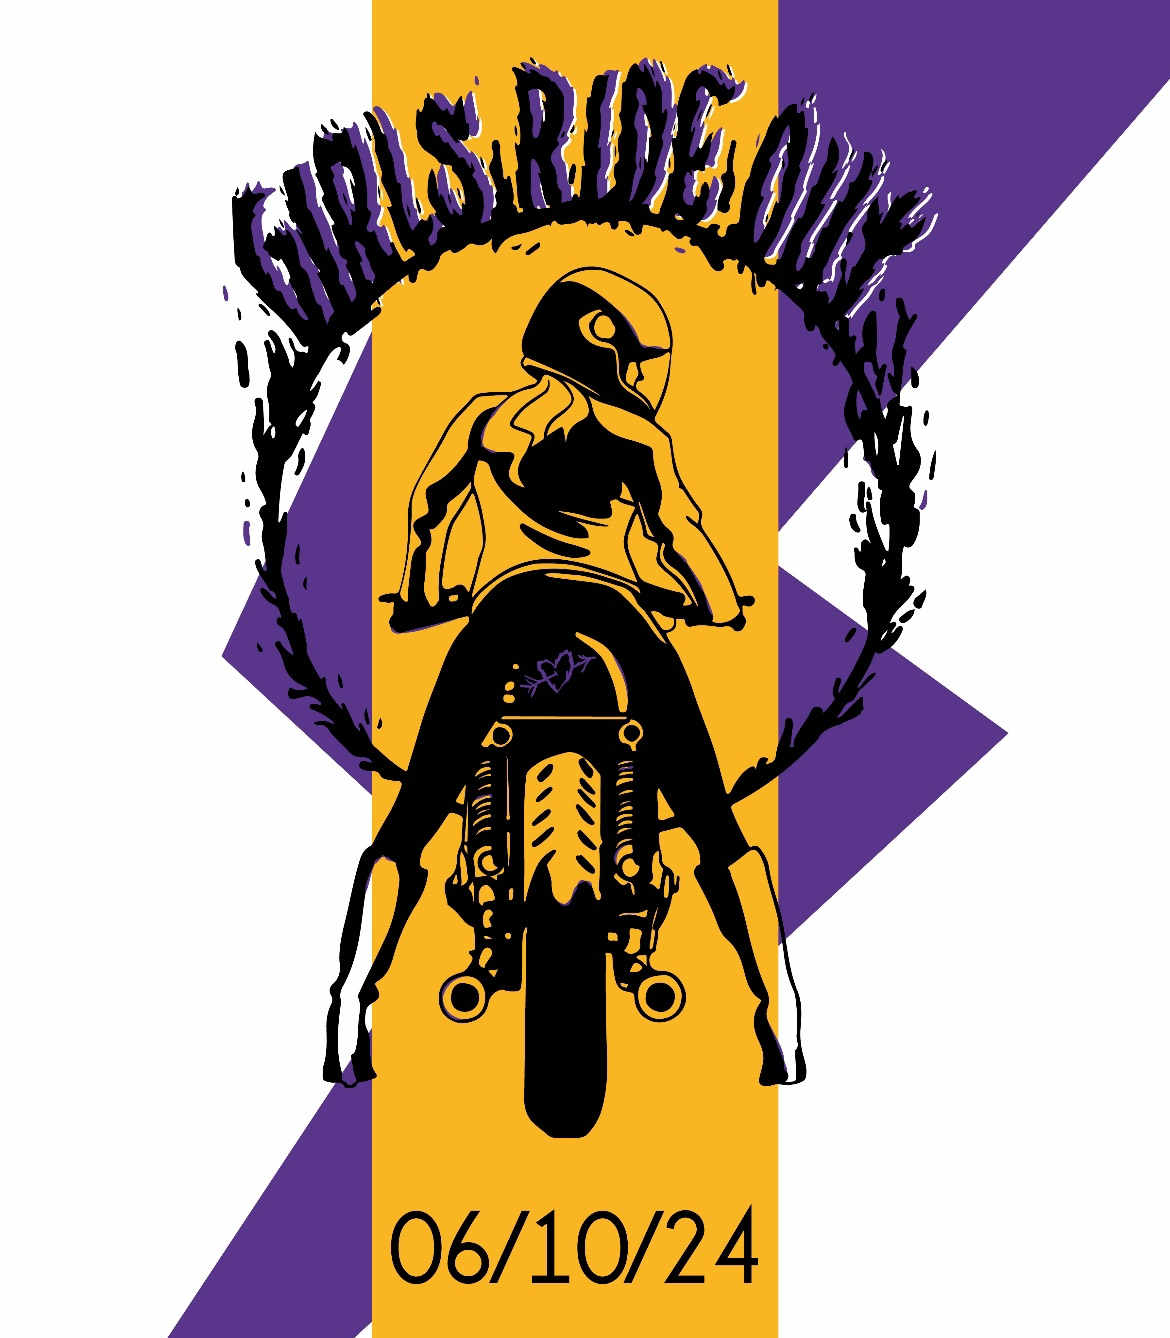 Grils Ride Out in Oktober